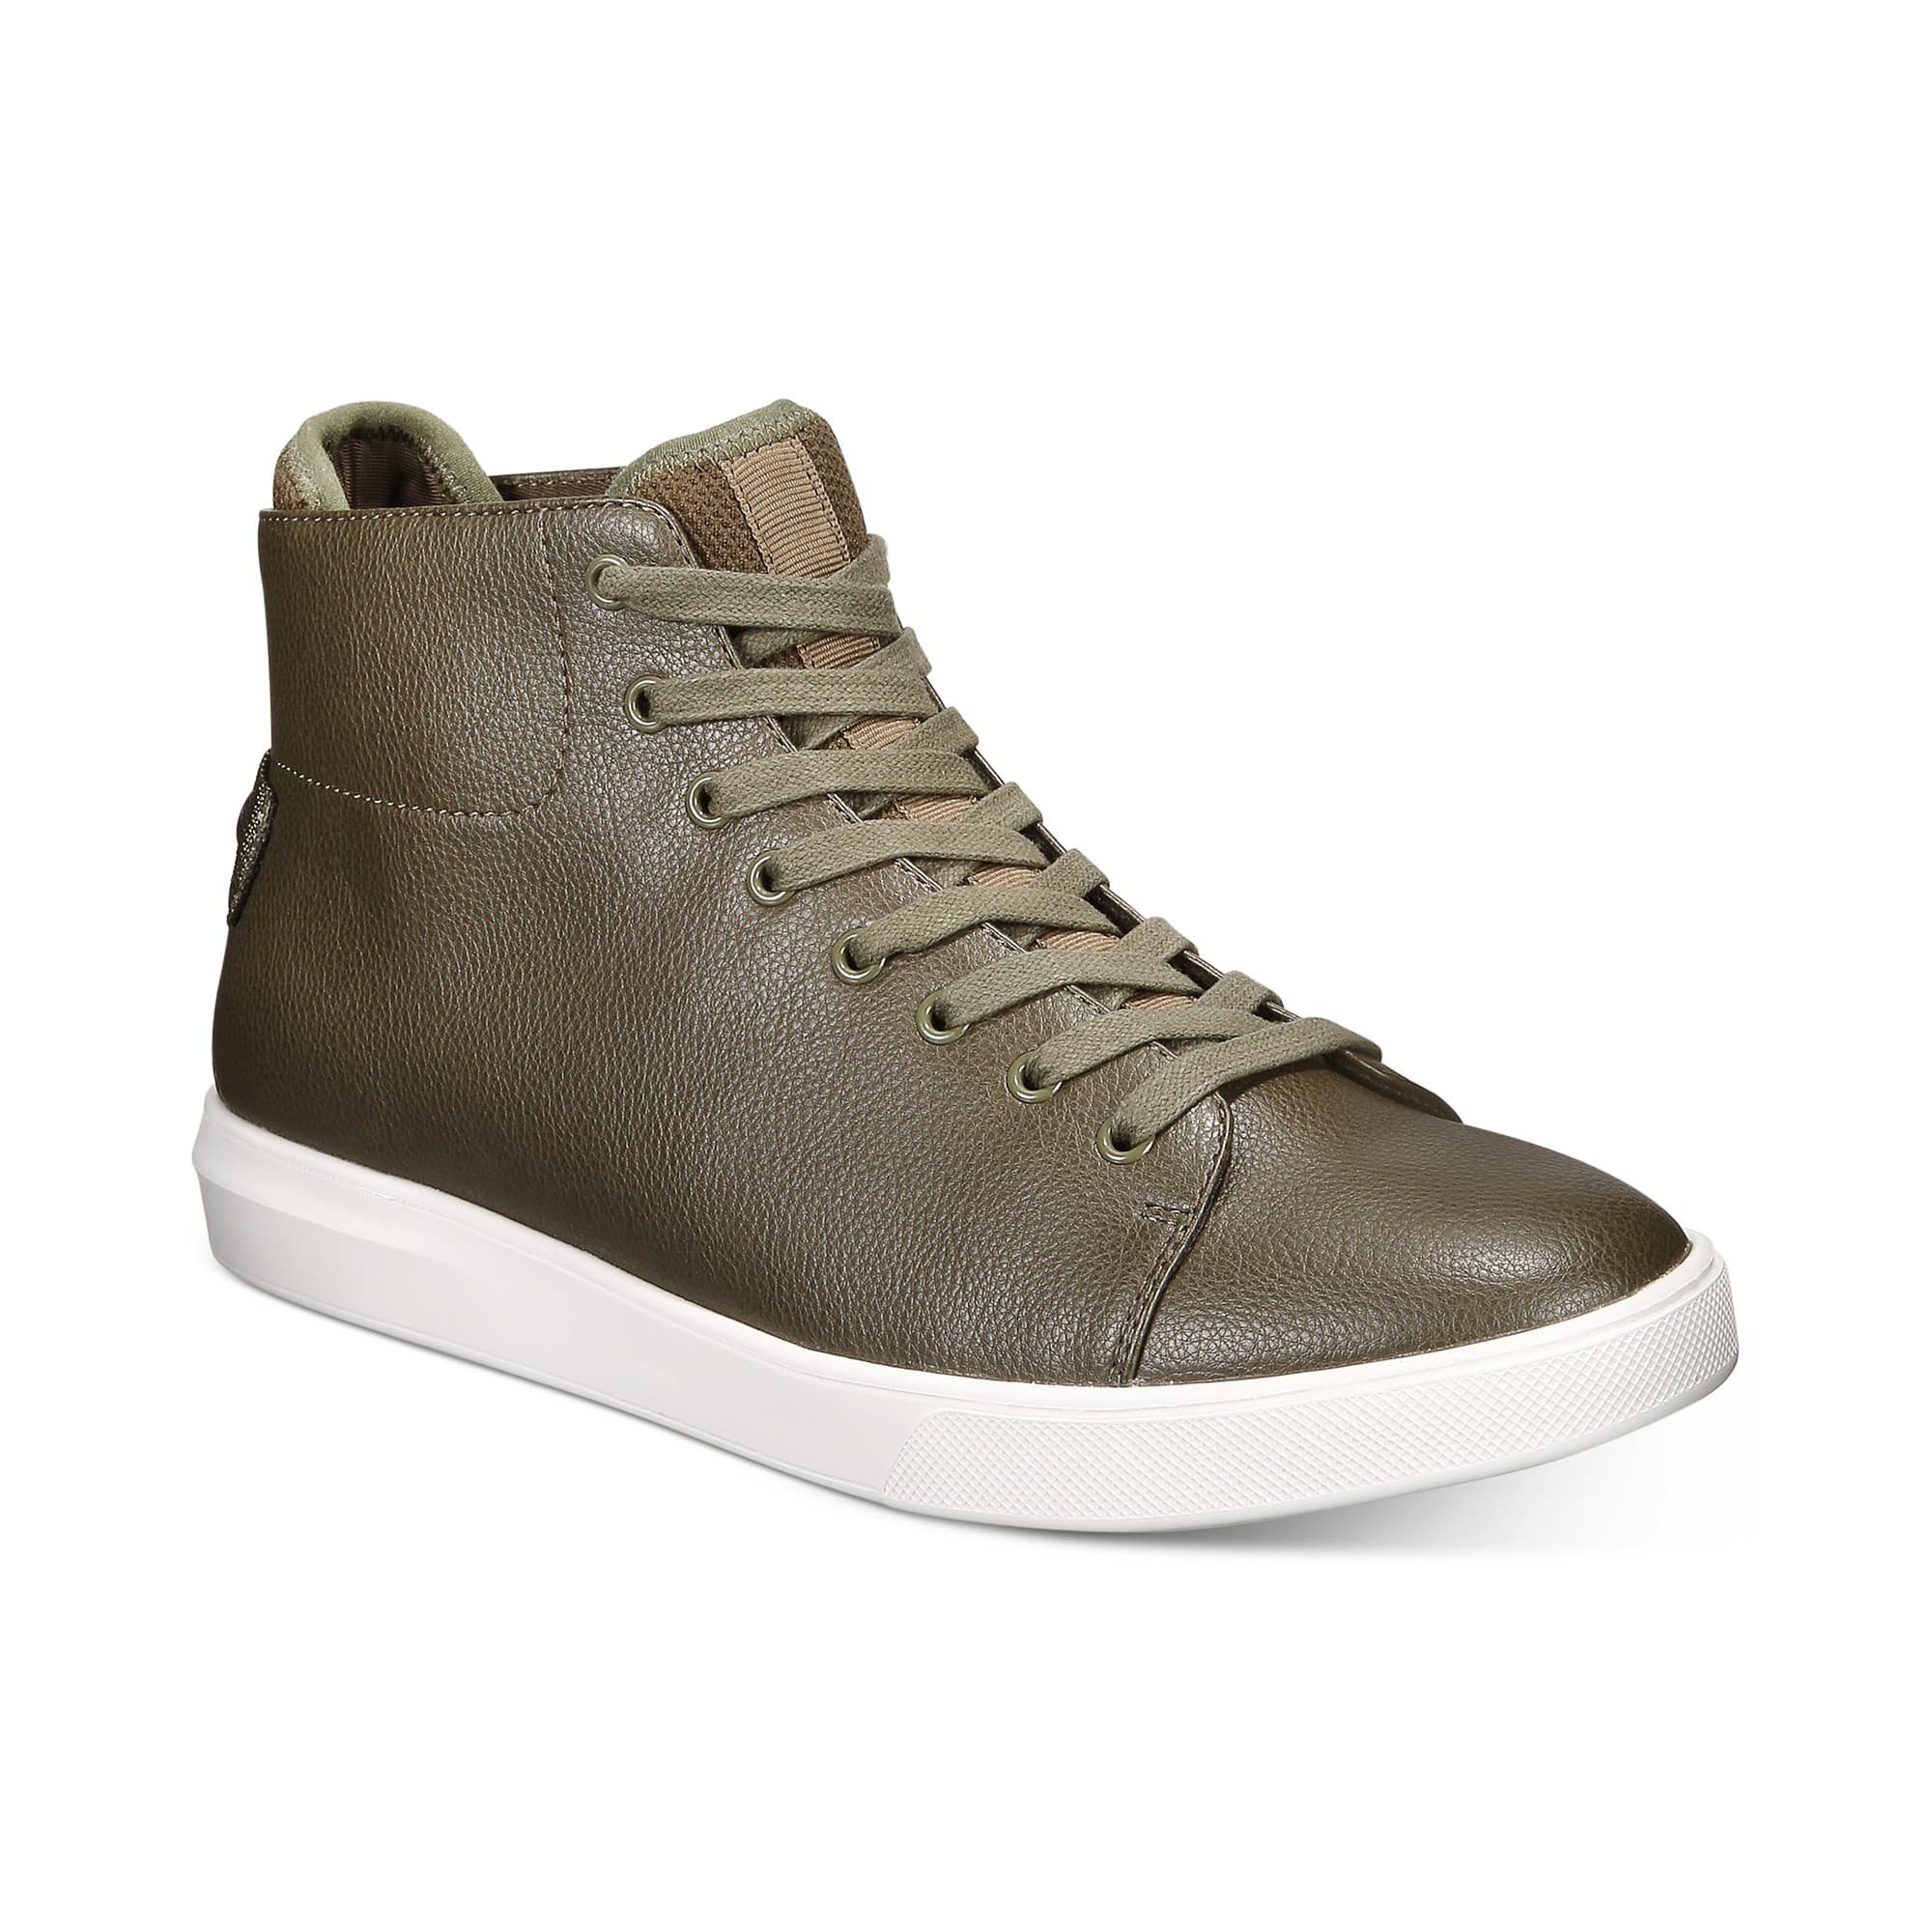 woocommerce-673321-2209615.cloudwaysapps.com-kingside-mens-olive-william-high-top-sneakers